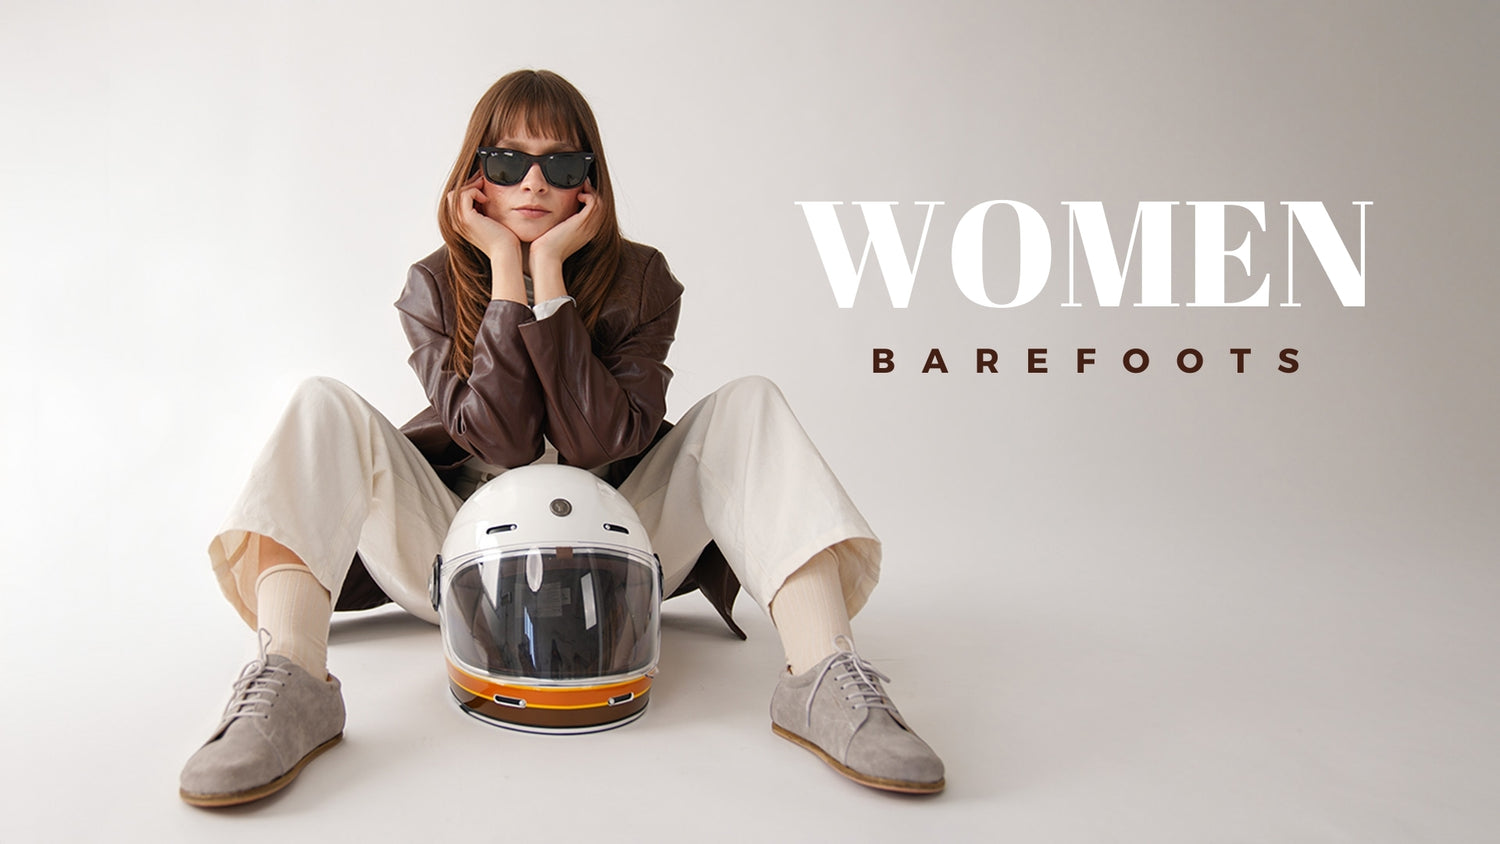 Woman in casual outfit wearing gray barefoot shoes, sitting with a motorcycle helmet, representing women's barefoot footwear collection.